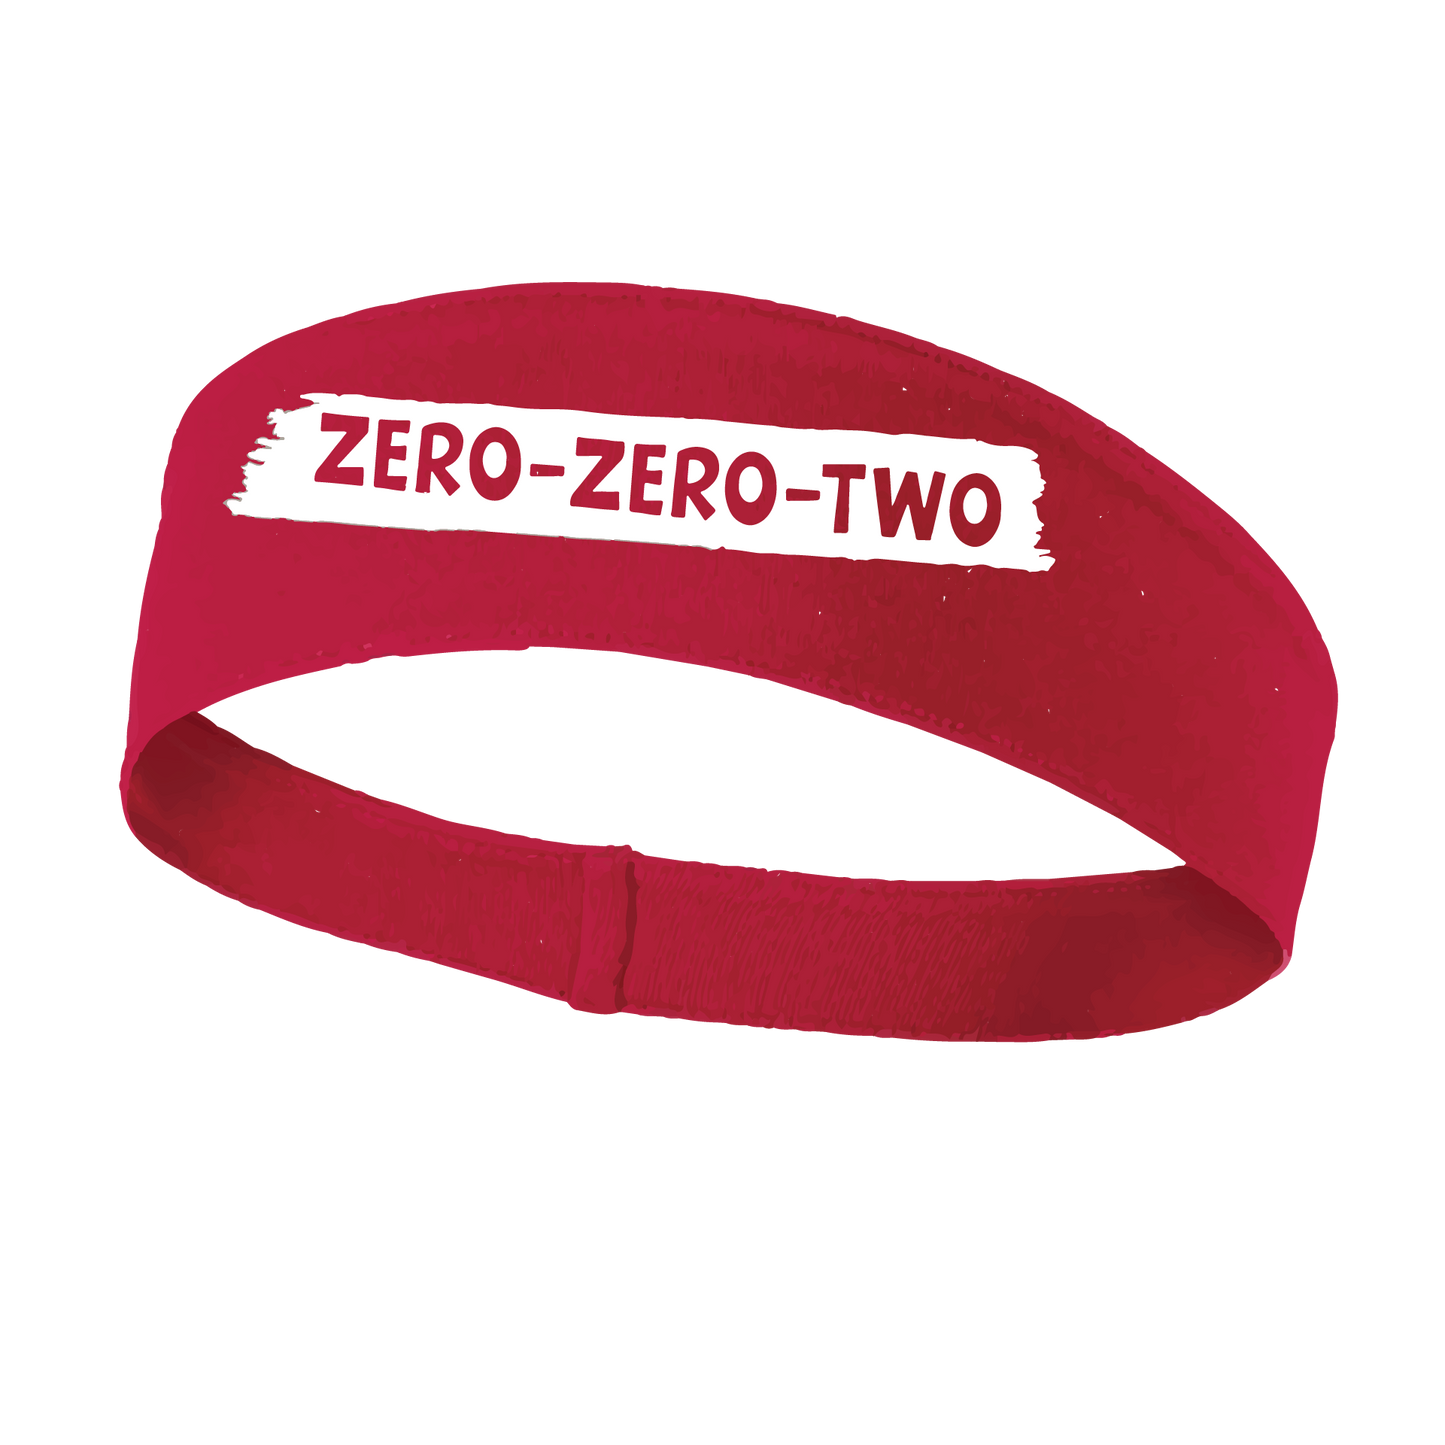 Pickleball Headband Design: Zero Zero Two  This fun, pickleball designed, moisture-wicking headband narrows in the back to fit more securely. Single-needle top-stitched edging. These headbands come in a variety of colors. Truly shows your love for the sport of pickleball!! 